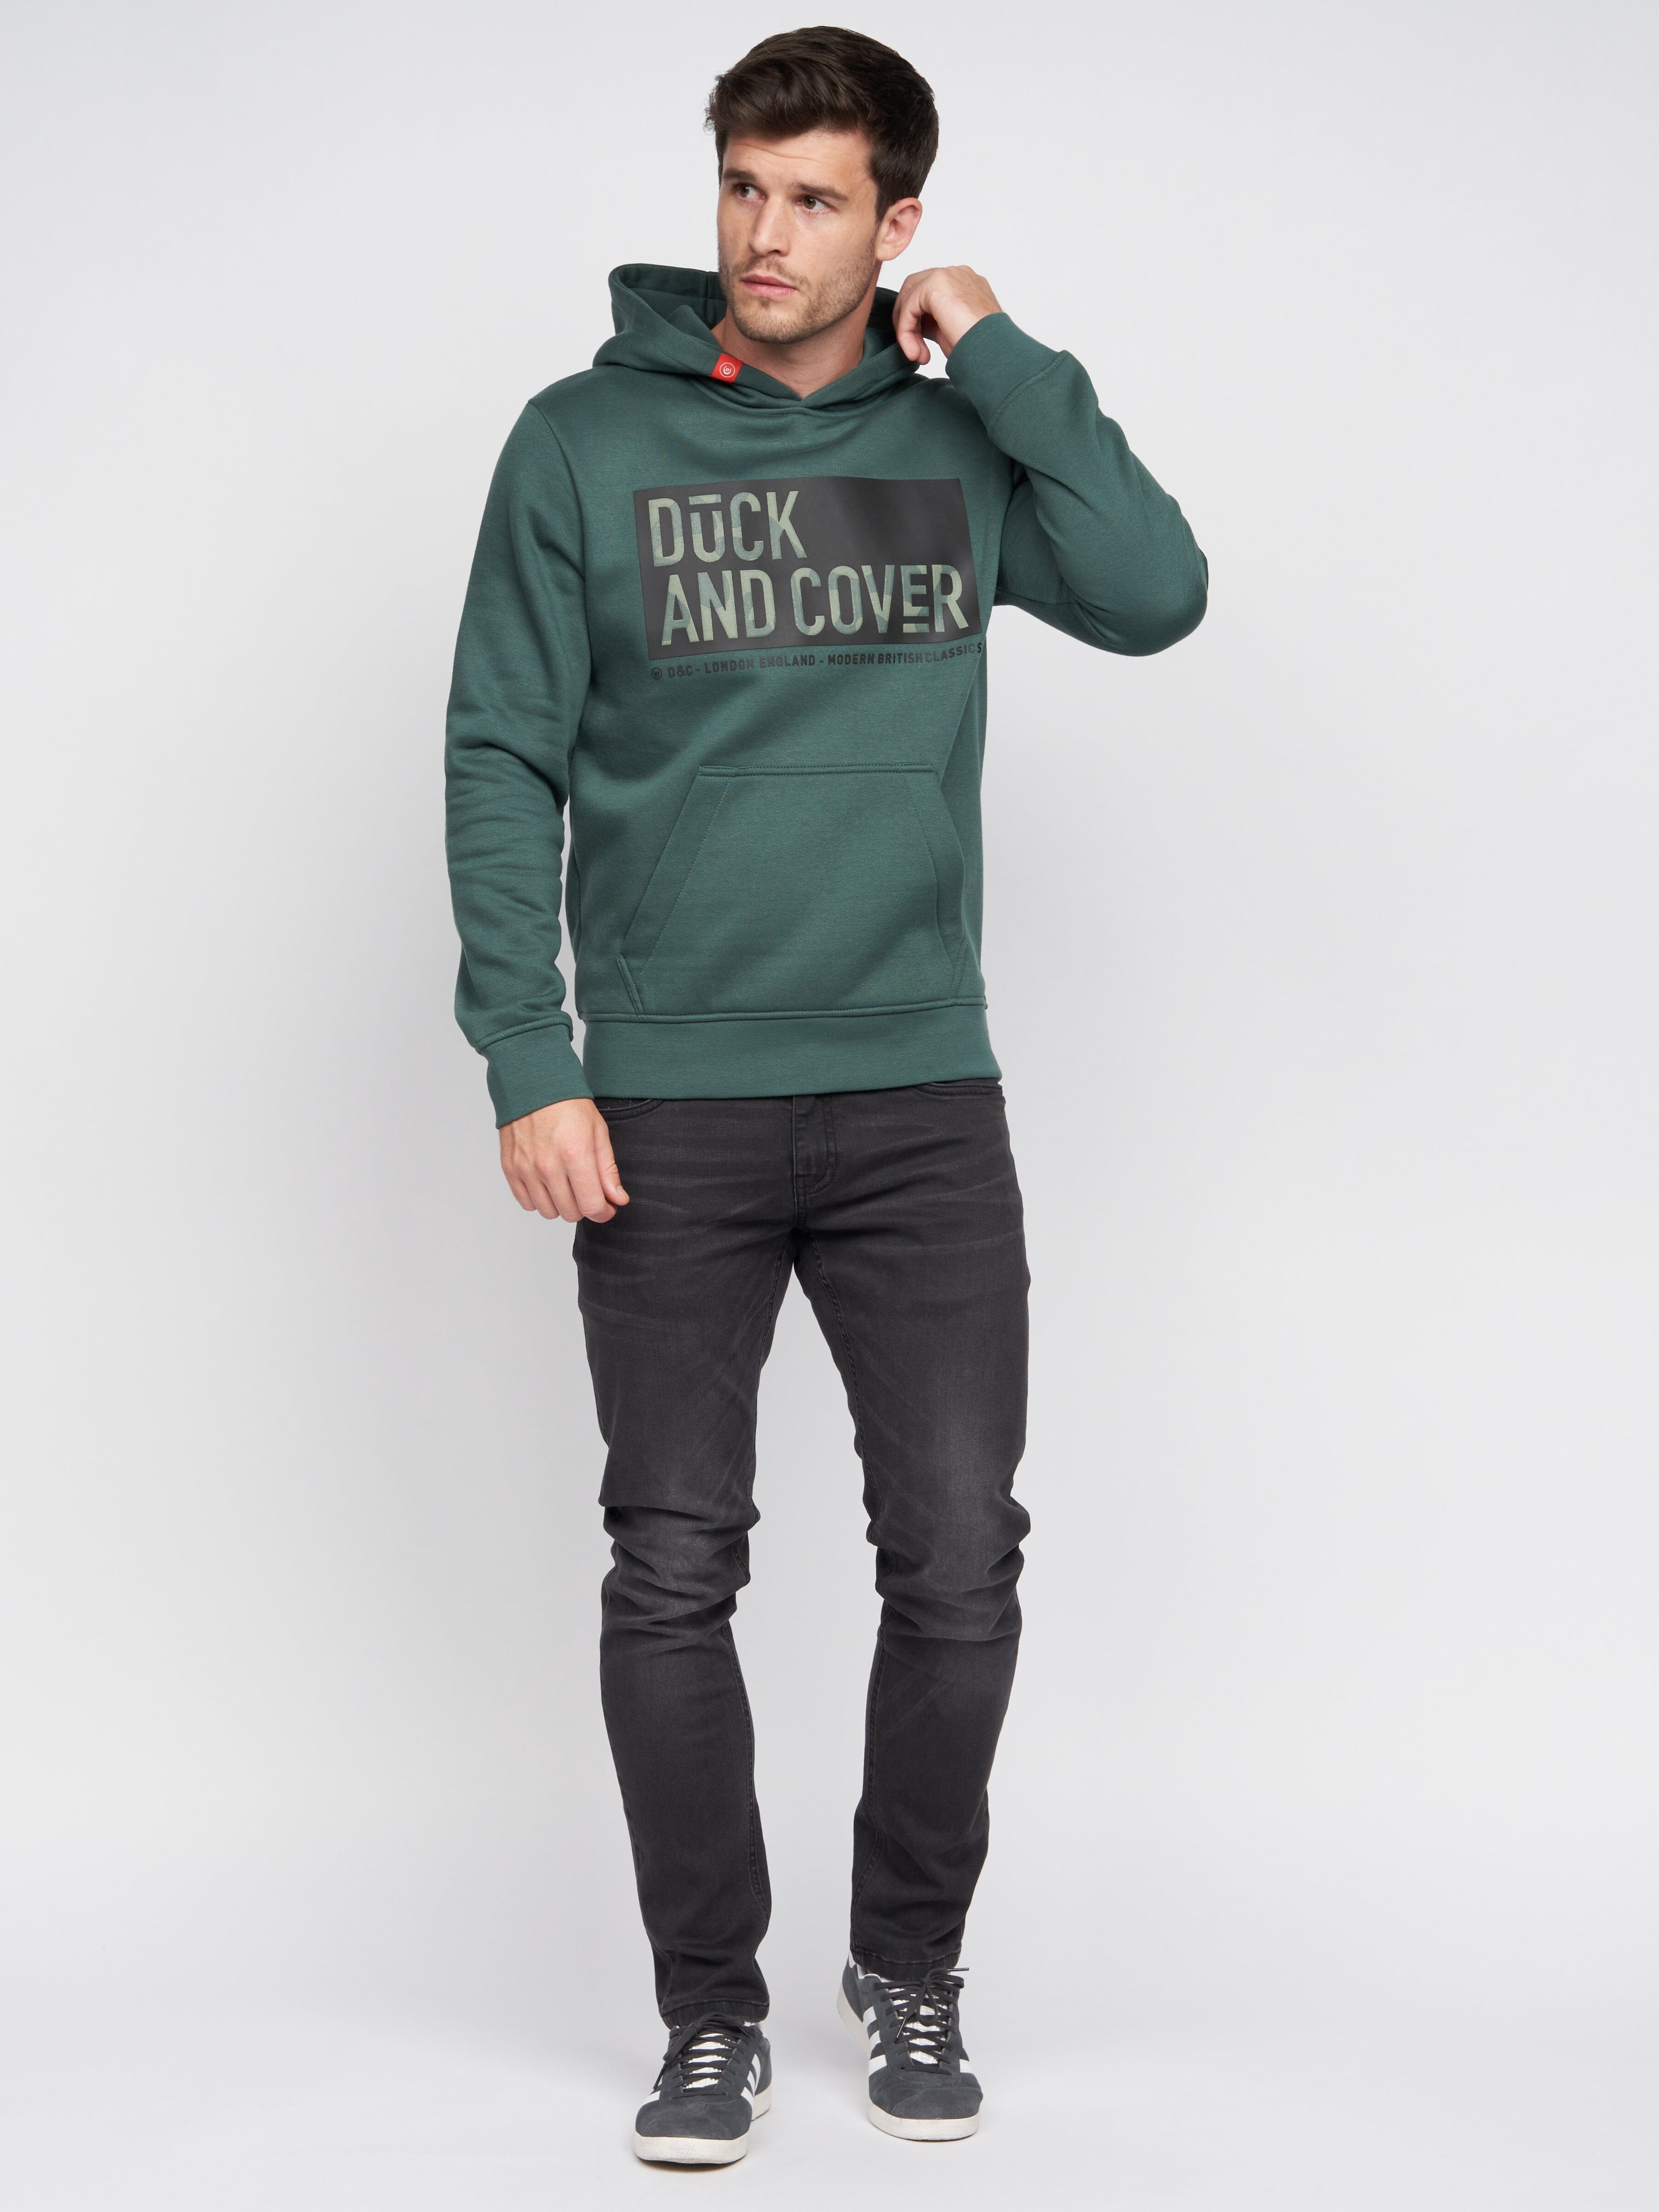 Quantain Hoodie Green